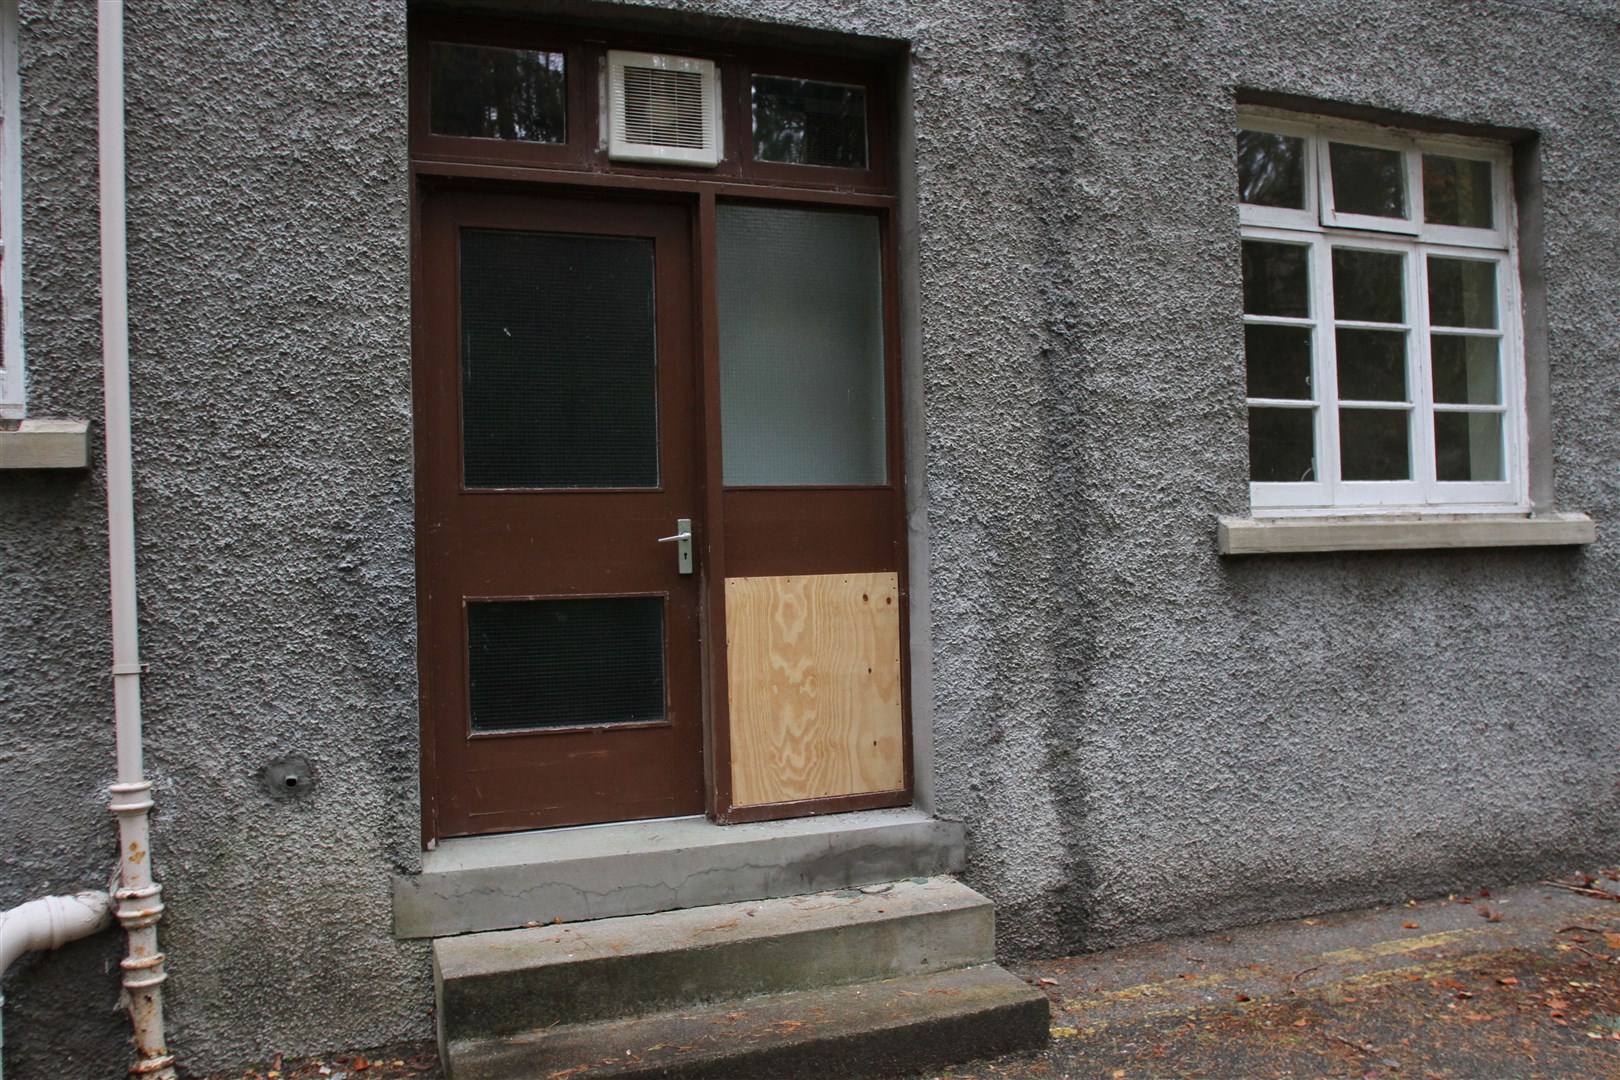 BOARDED UP: Some repairs have been done after the latest spate of vandalism but more work is needed with some windows still broken and a ceiling reportedly down now inside. Photos: Frances Porter